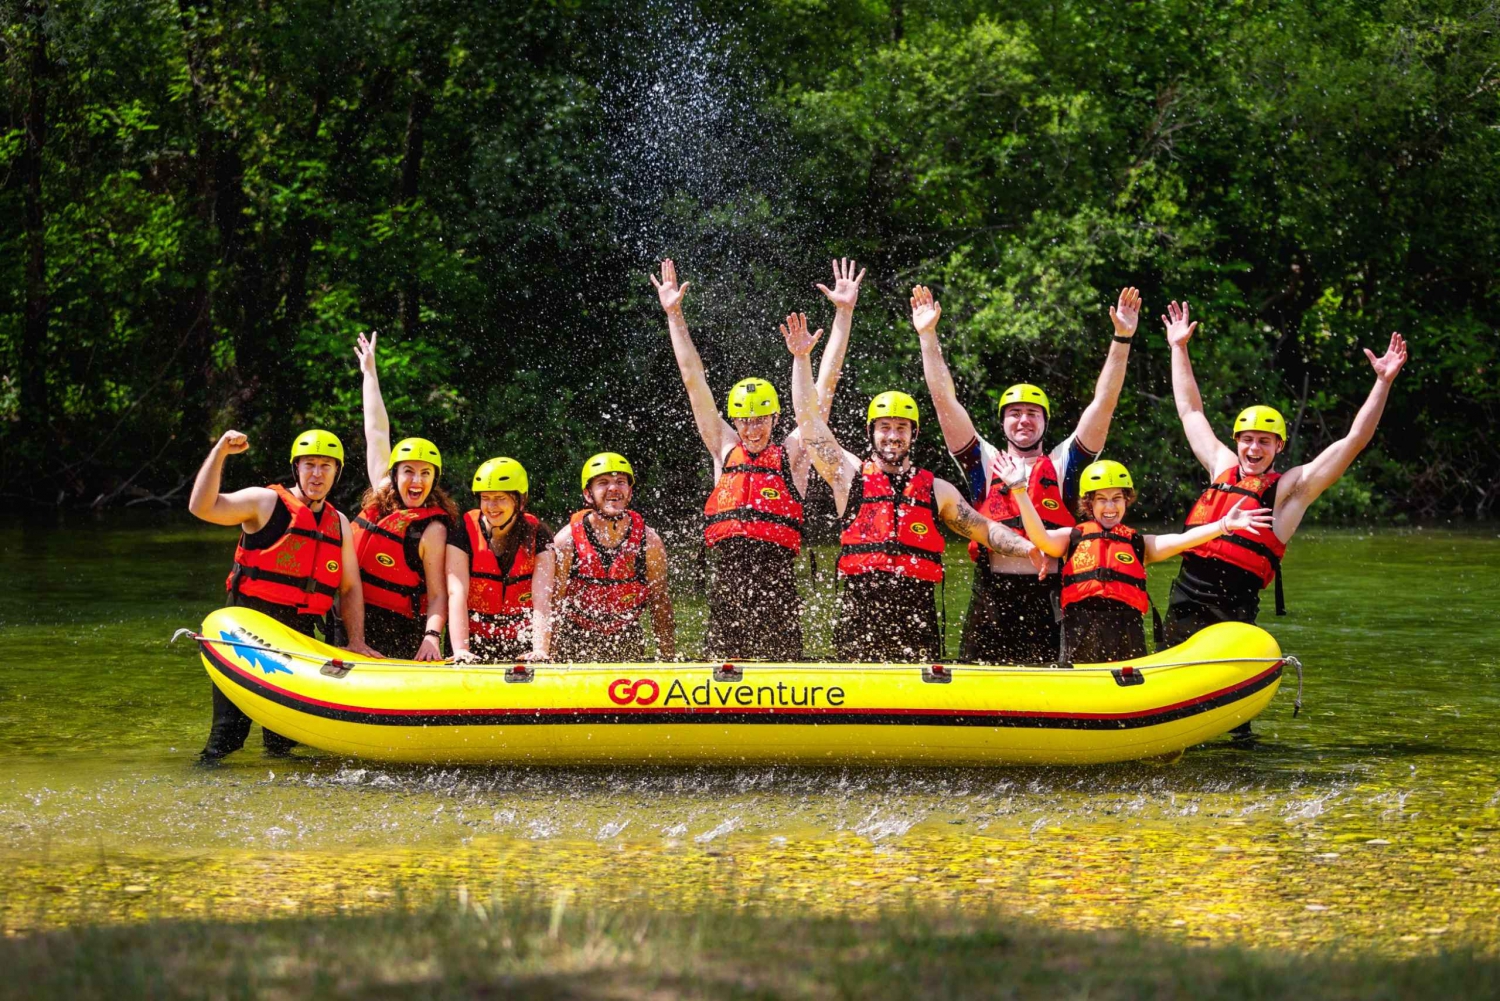 From Split: Rapid Rafting on the Cetina river